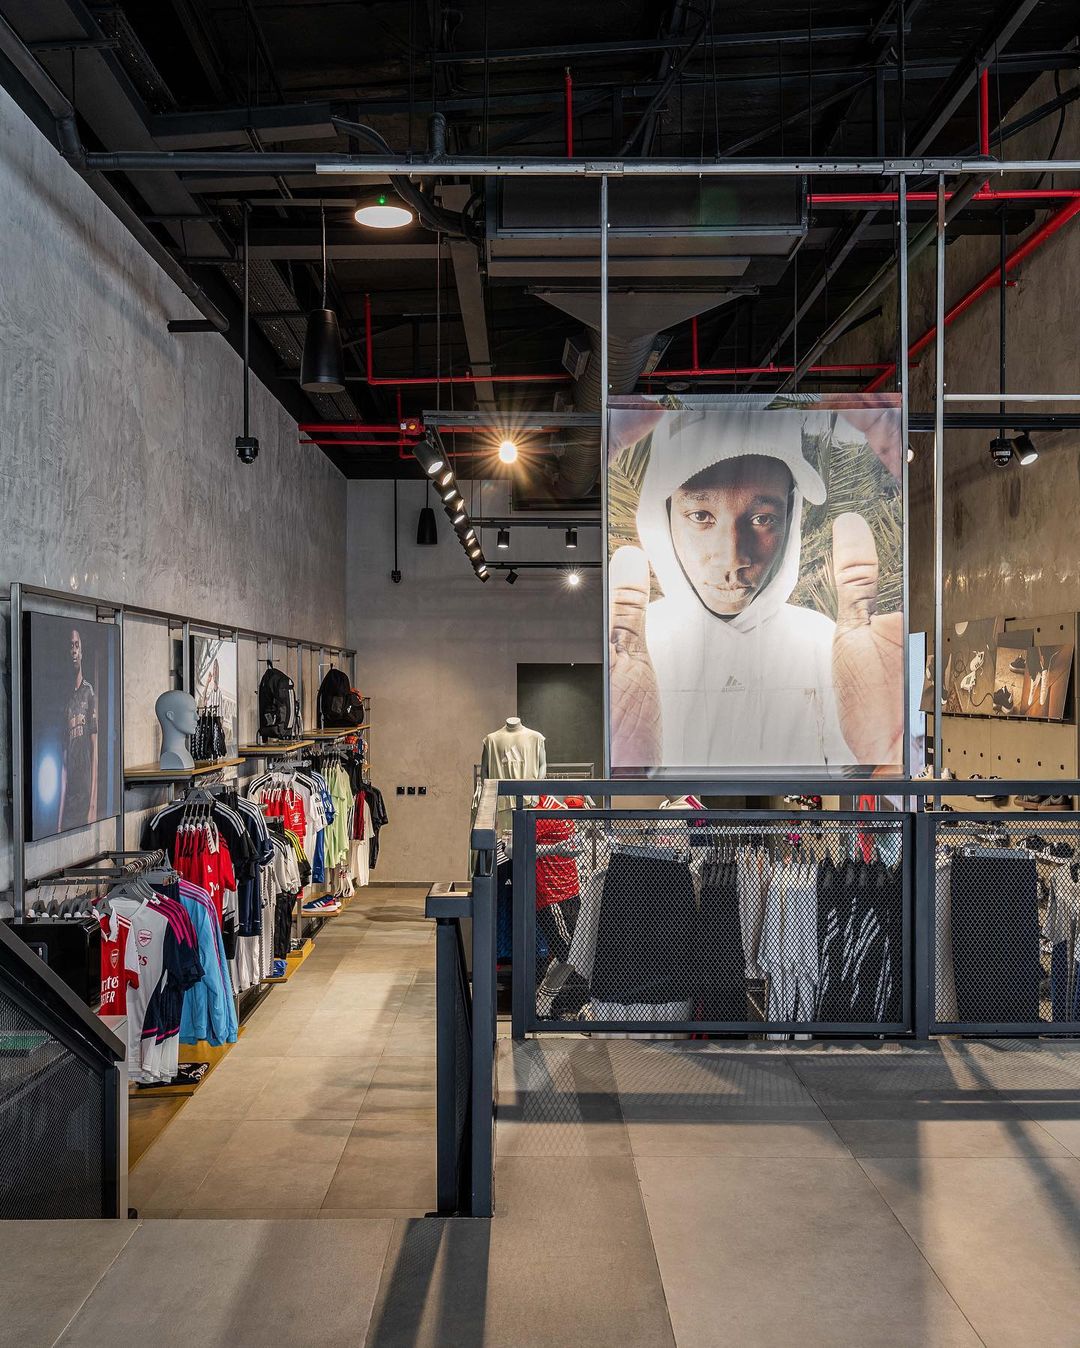 Industrial Chic Interior Design of the Adidas Flagship Store in